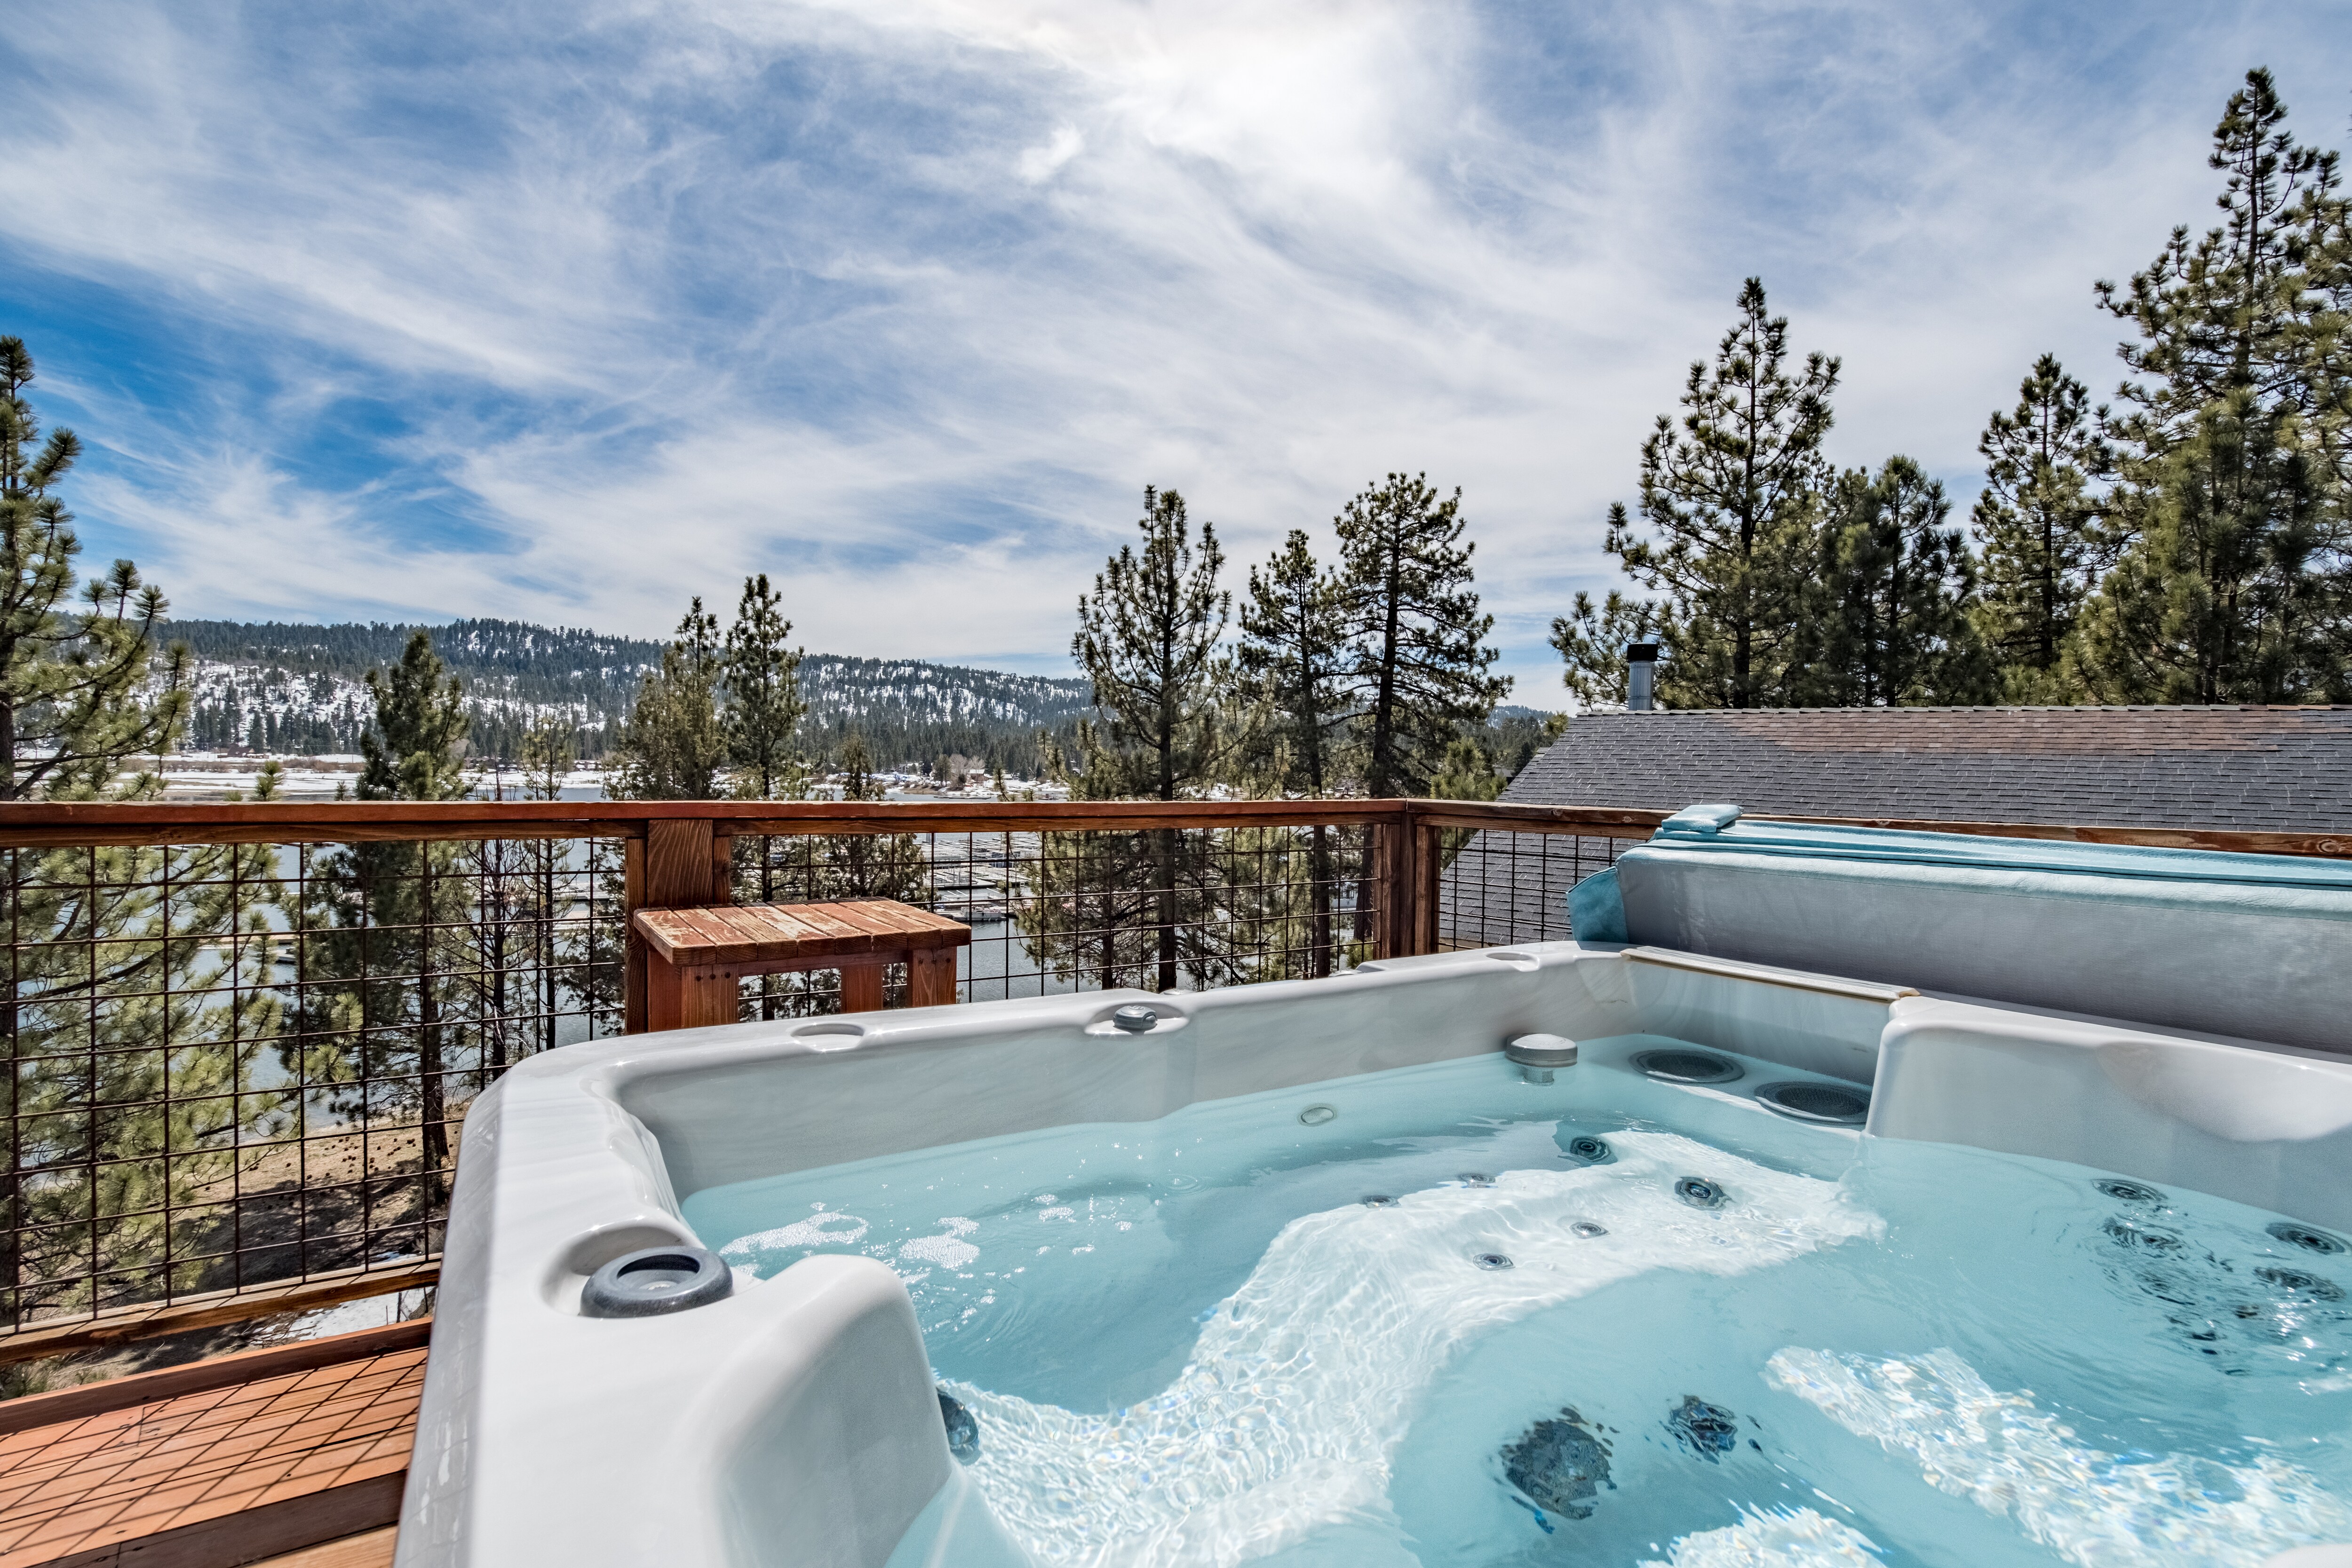 Enjoy unparalleled views of Big Bear Lake from your spacious balcony and private hot tub.